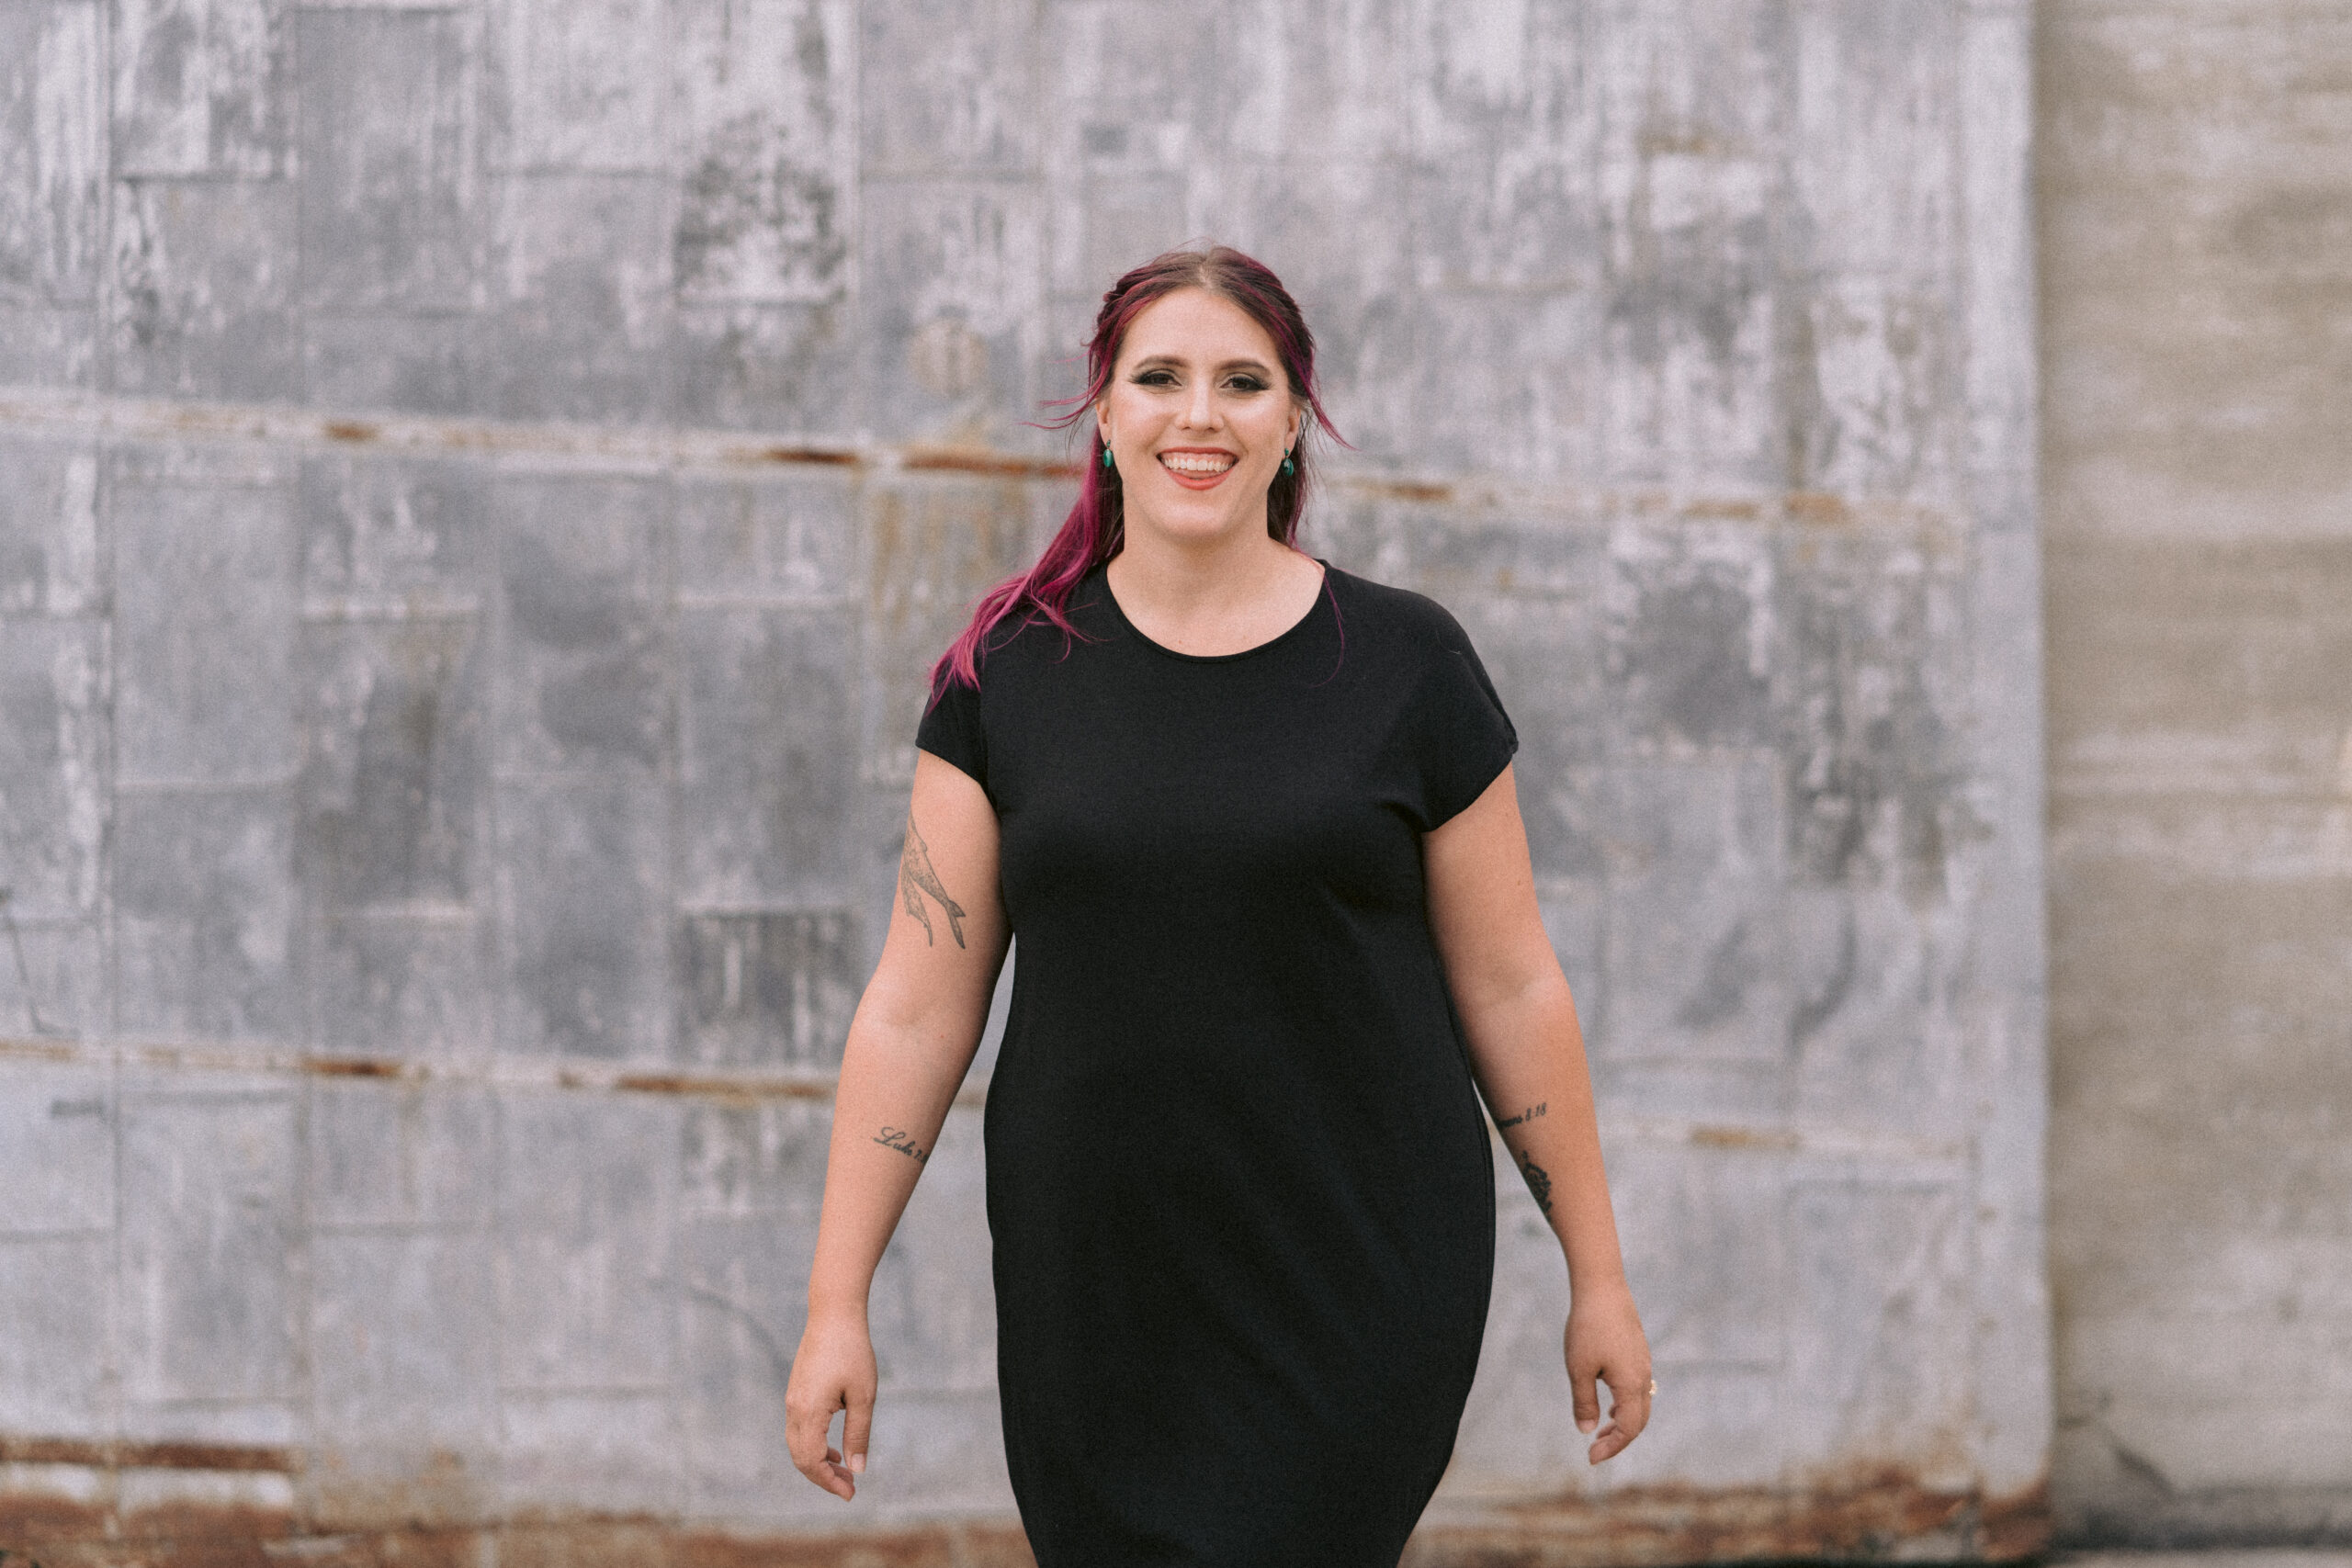 An SEO copywriter in a black dress smiles in front of a stone wall.